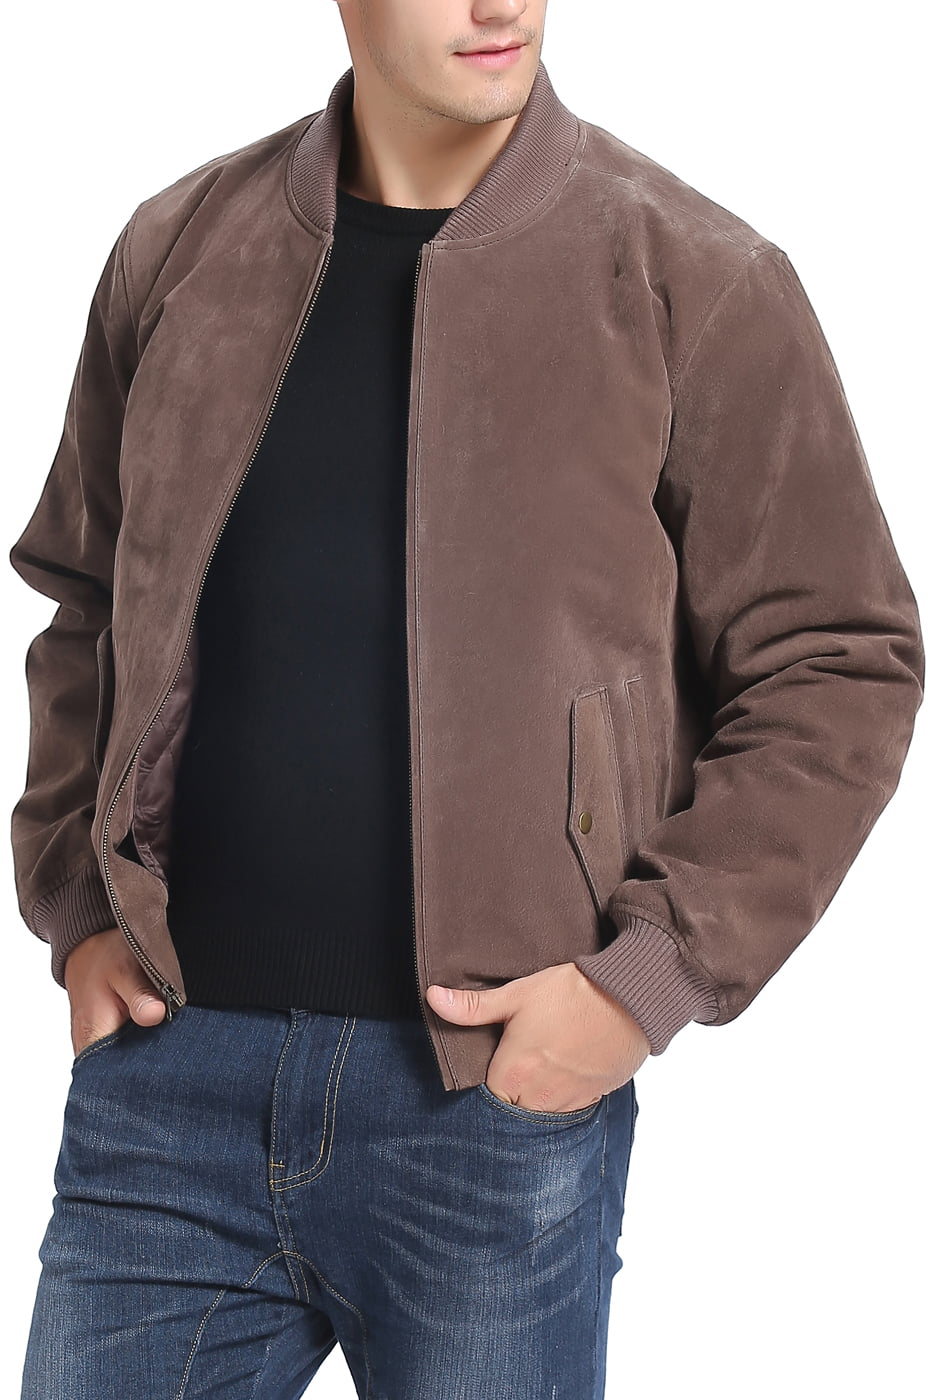 Regular and Big & Tall Sizes BGSD Mens Classic Suede Leather Bomber ...